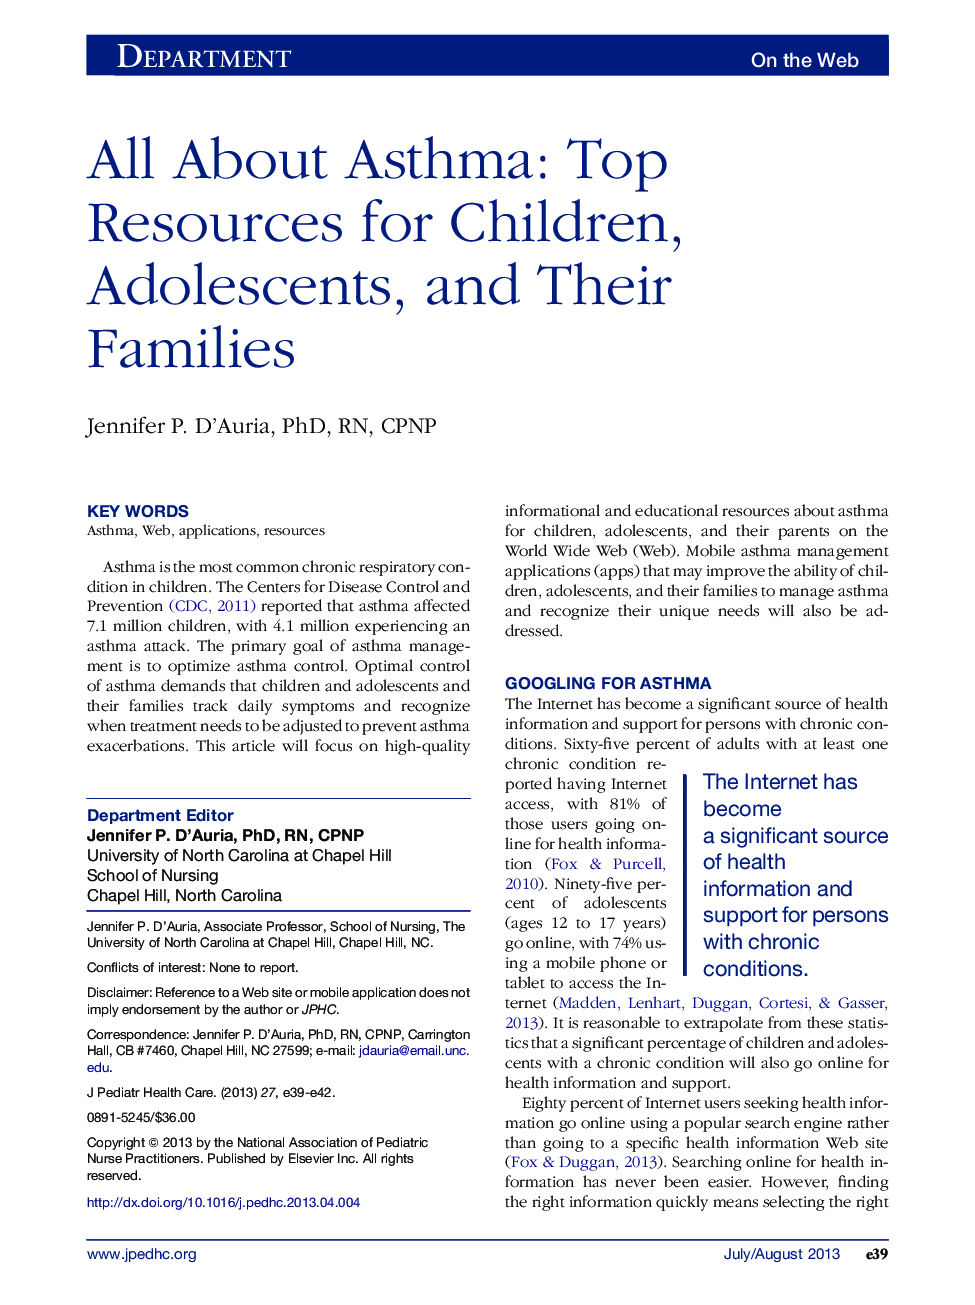 All About Asthma: Top Resources for Children, Adolescents, and Their Families